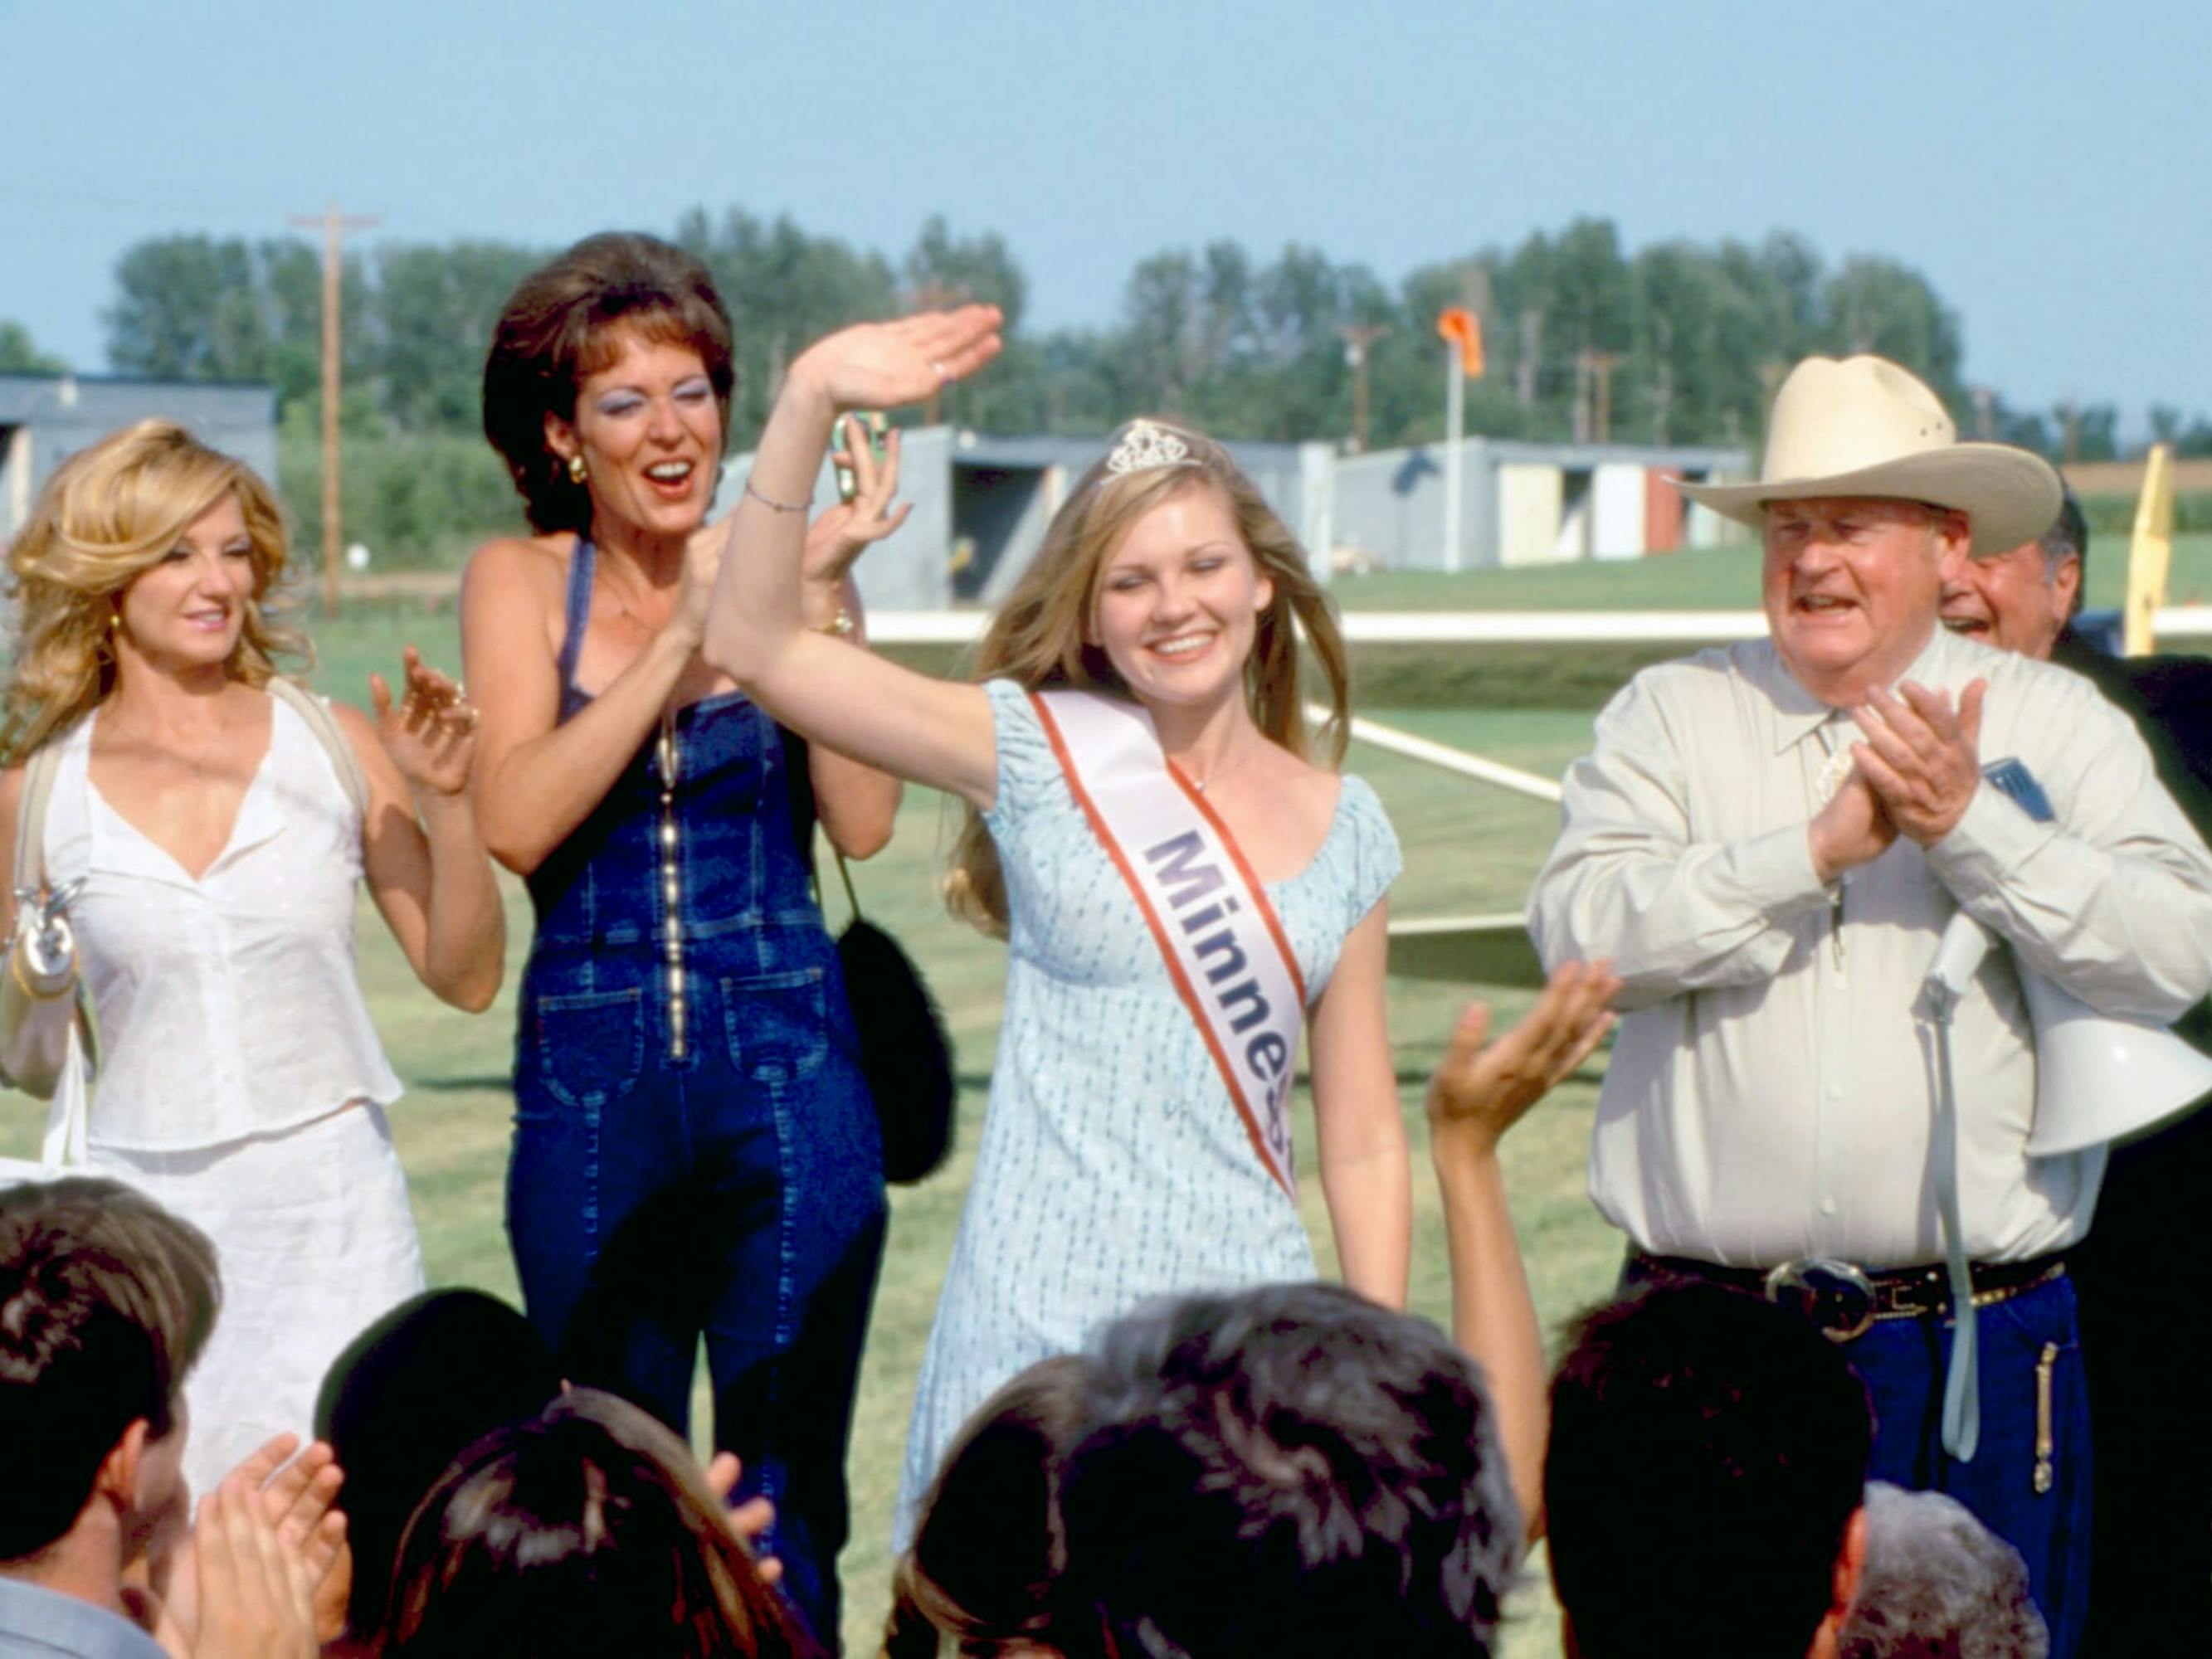 Annette Atkins (Ellen Barkin), Loretta (Allison Janney), and Amber Atkins (Kirsten Dunst) stand together at a beauty pageant. Dunst wears a Minnesota sash and waves at the crowd.